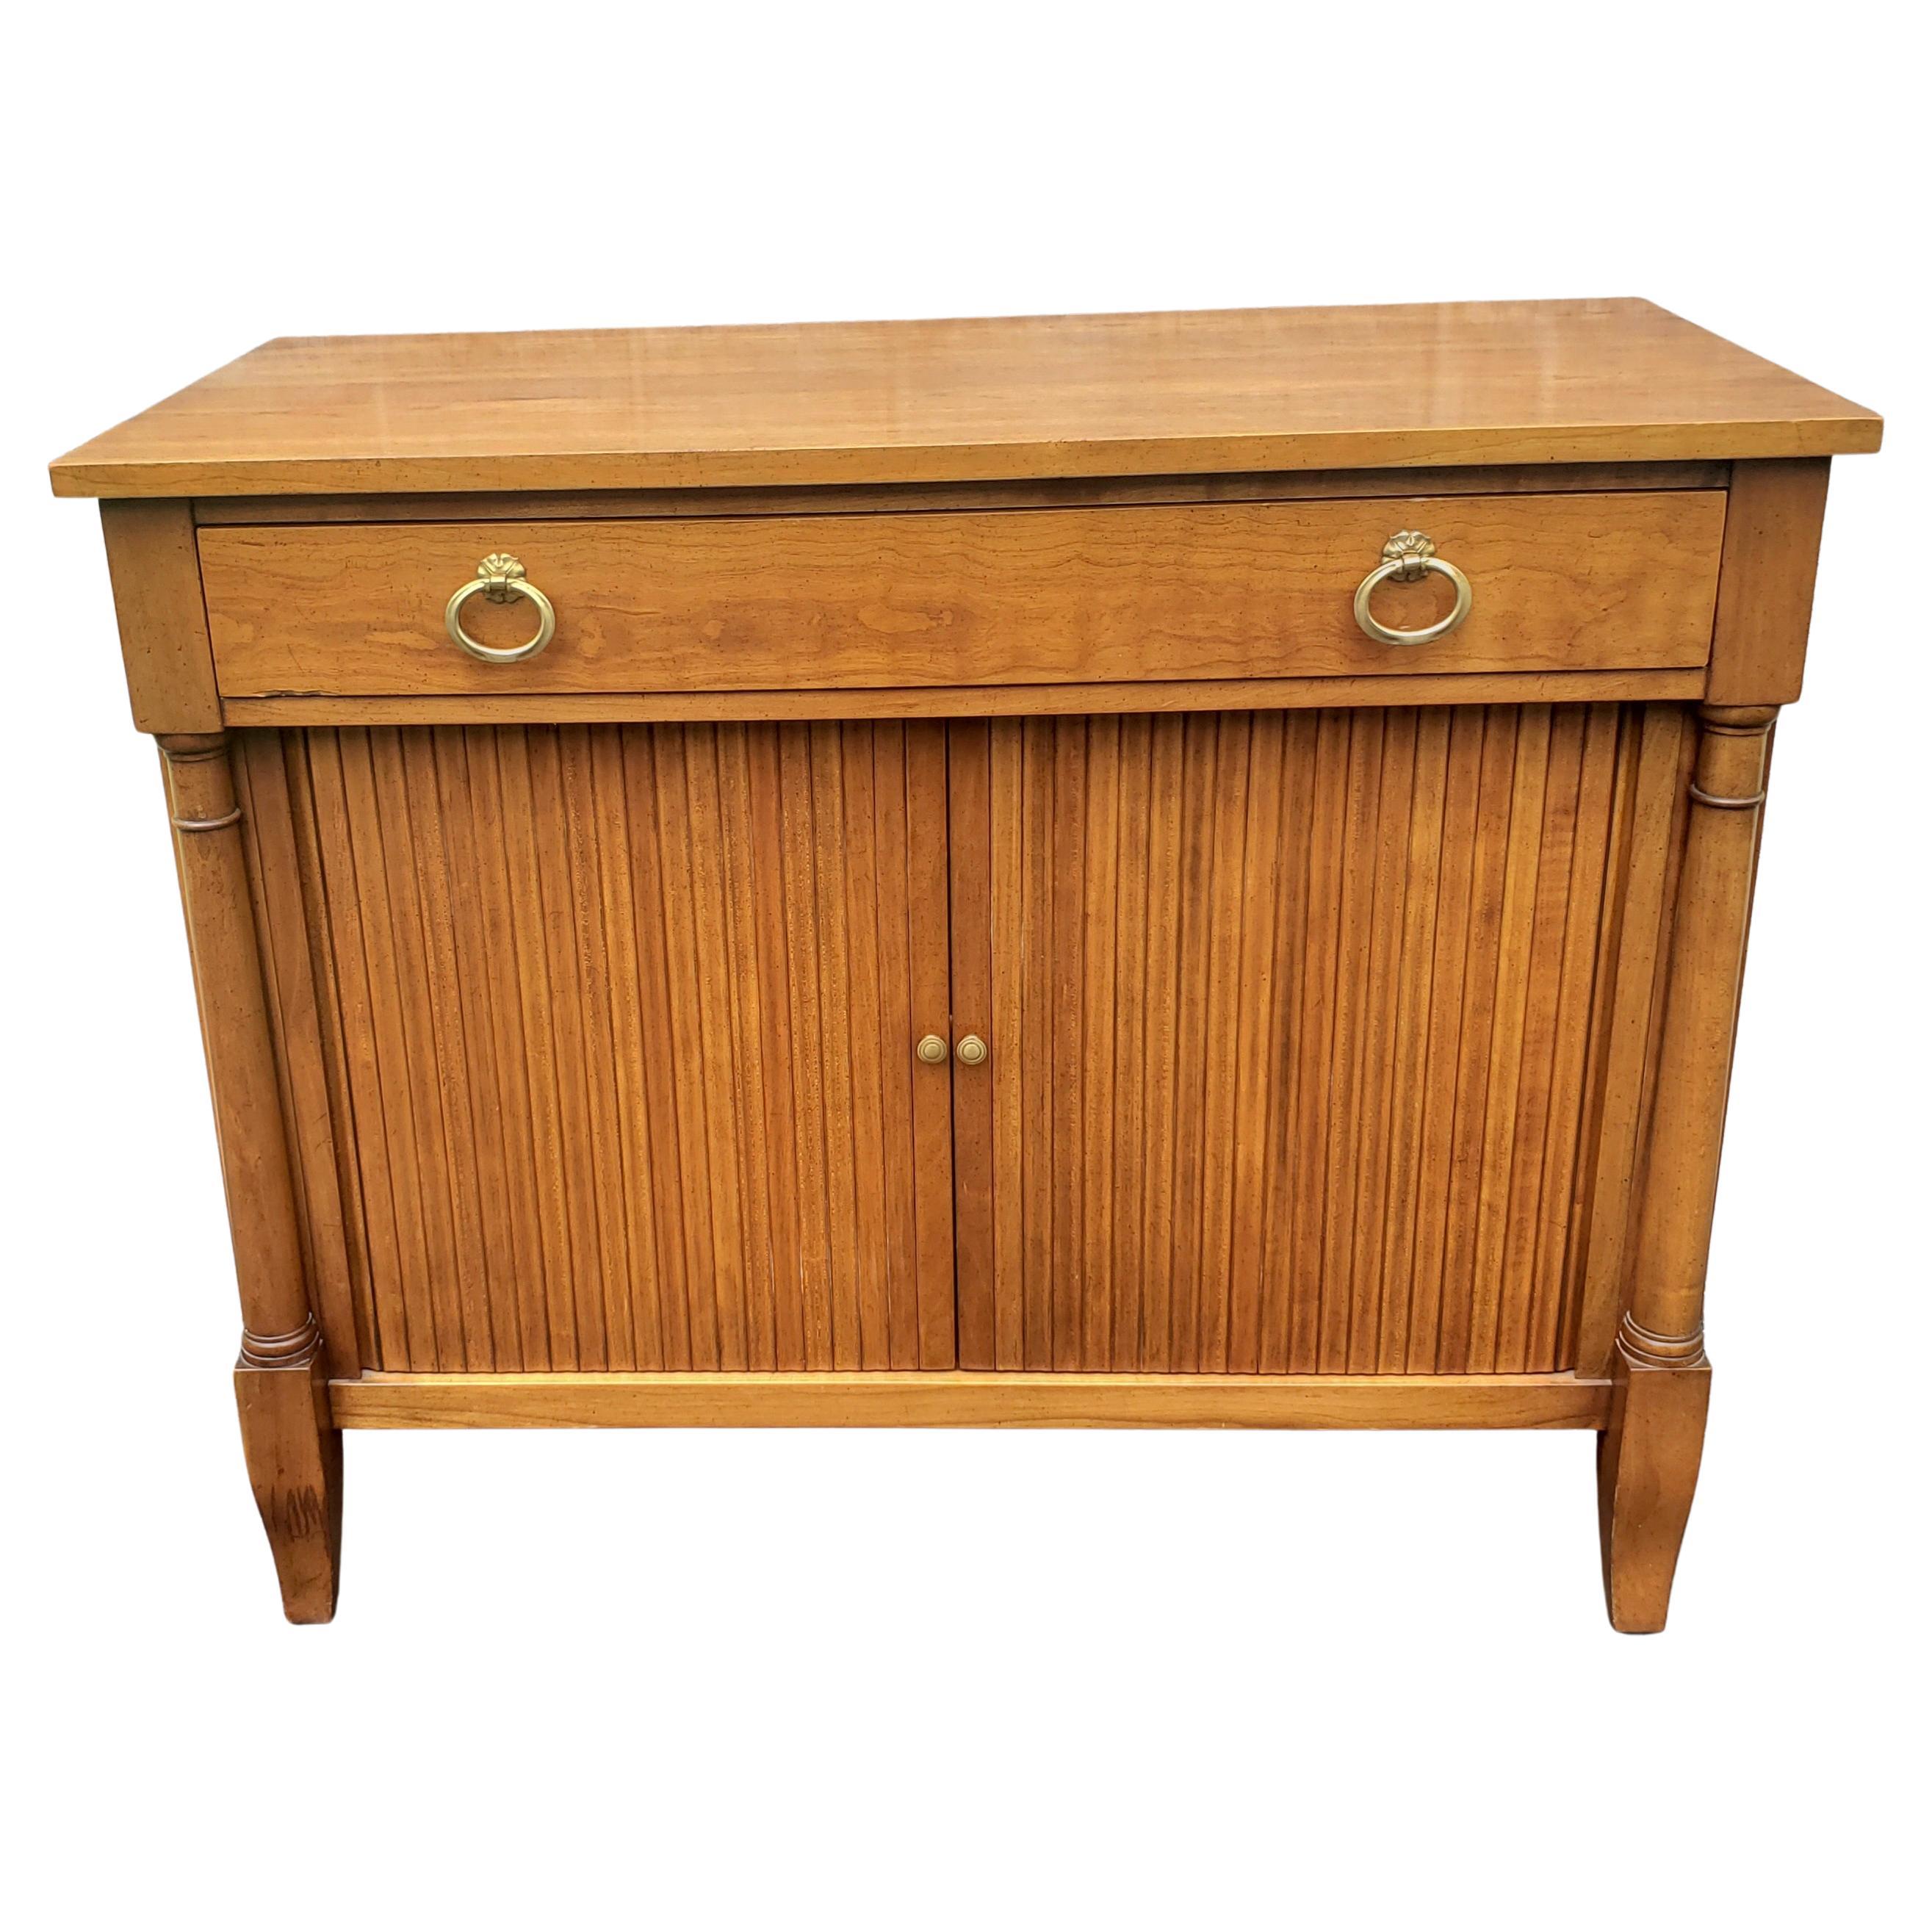 Sweet small buffet cabinet with lots of storage in the Scandinavian Modern style, Belvedere finish is a medium brown. Finish in good shape with light wear appropriate with age and use. 
Measures 39